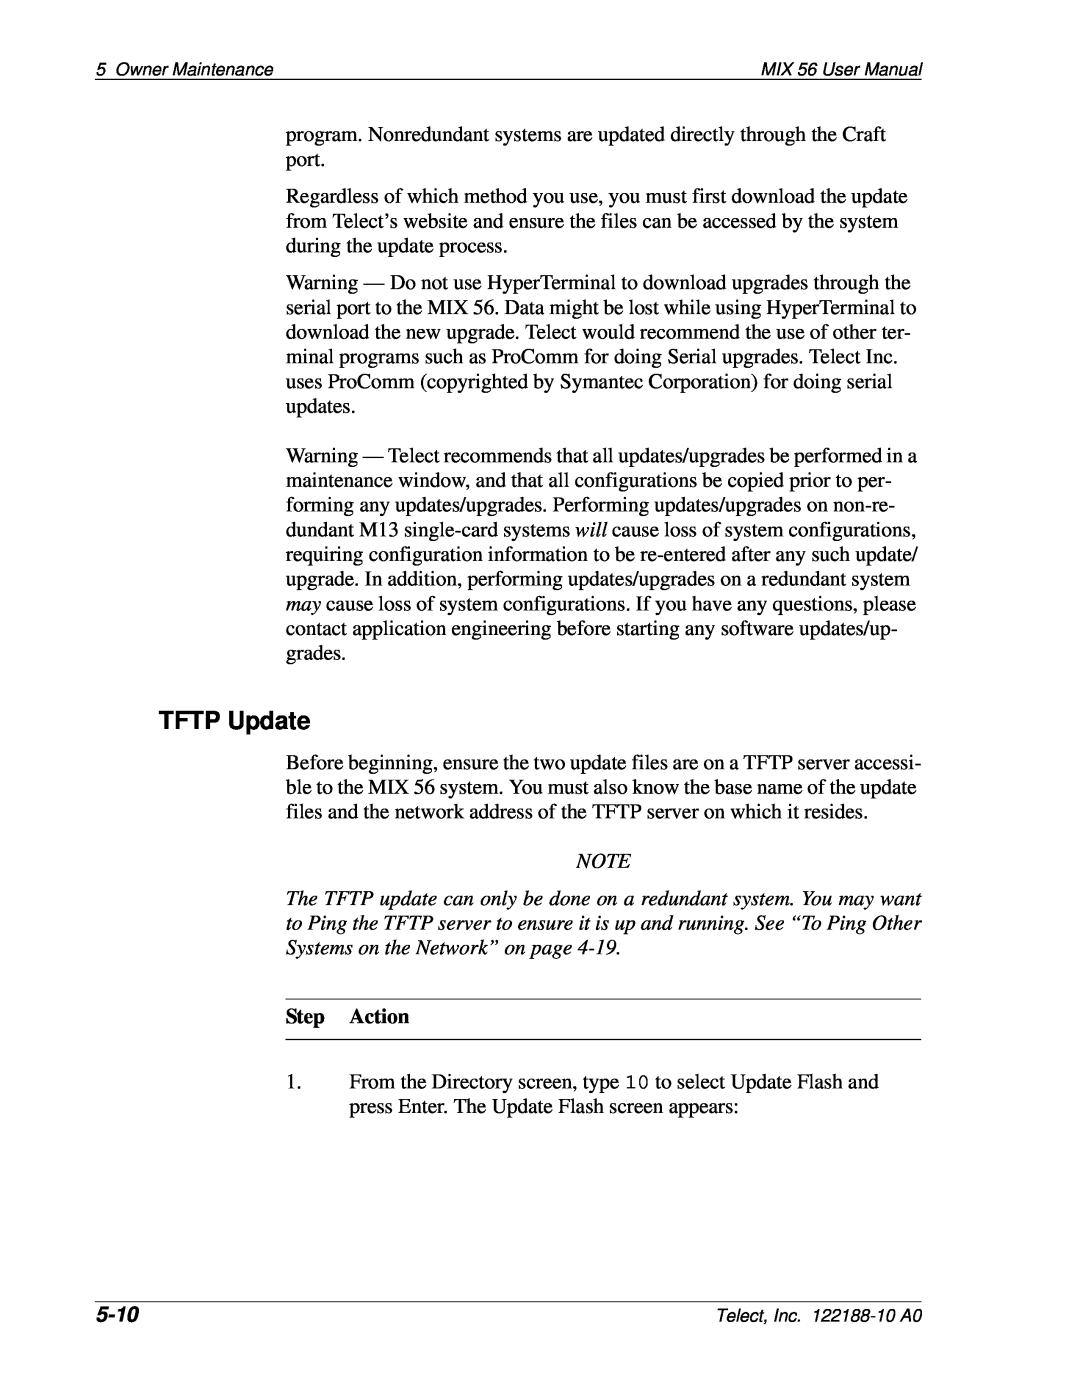 Telect MIX 56 user manual TFTP Update, 5-10, Step Action 